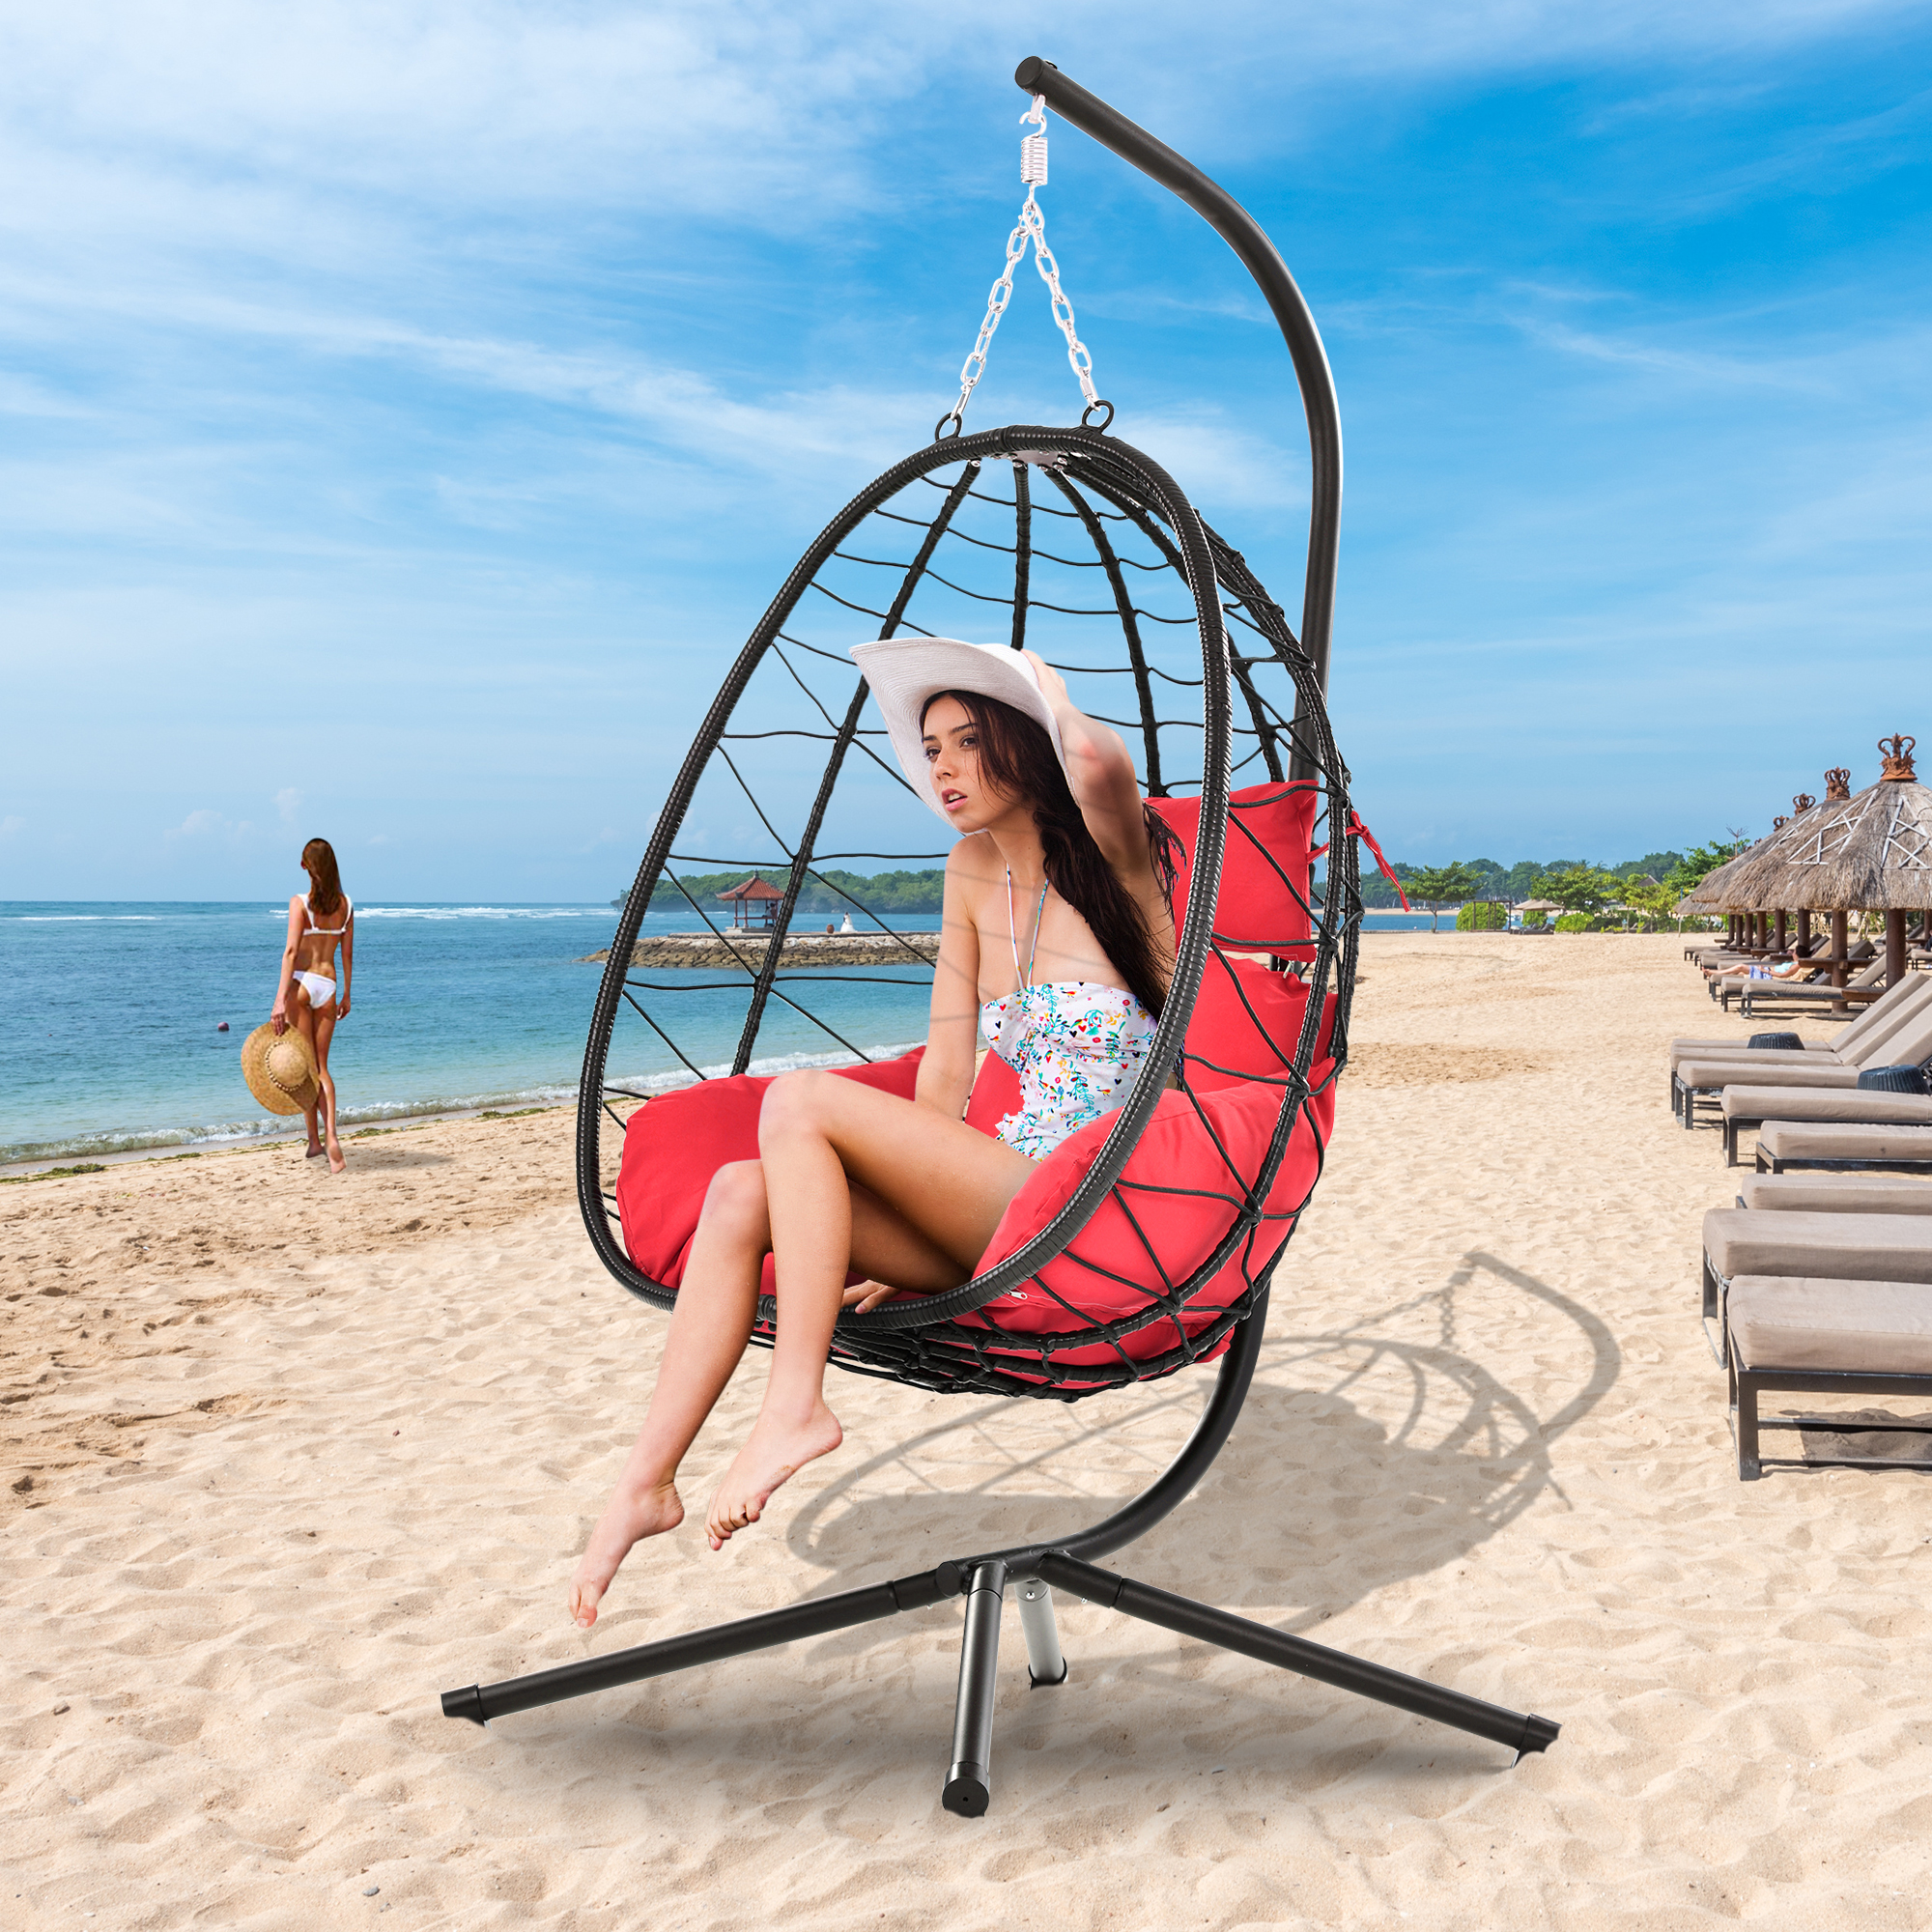 Egg Chair, Indoor Outdoor Patio Wicker Hanging Chair with Stand, Hanging Swing Chair w/ Cushion, Durable All-Weather UV Rattan Lounge Chair for Bedroom, Patio, Deck, Yard, Garden, 350lbs, Red, SS1953 - image 2 of 9